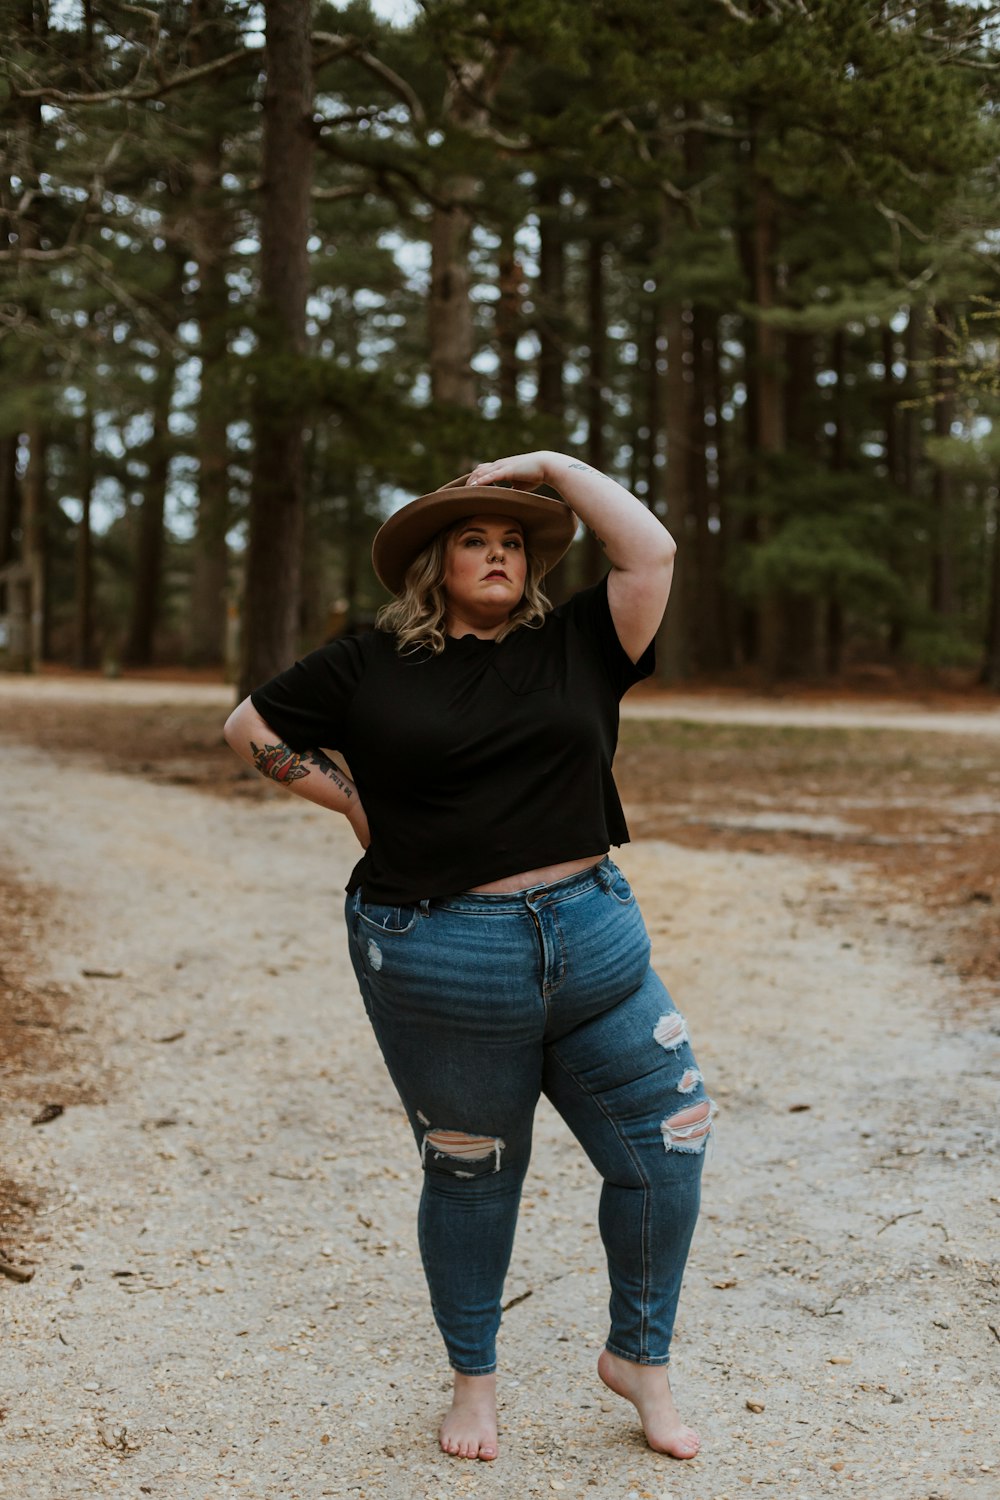 woman in black t-shirt and blue denim jeans standing on dirt road during daytime